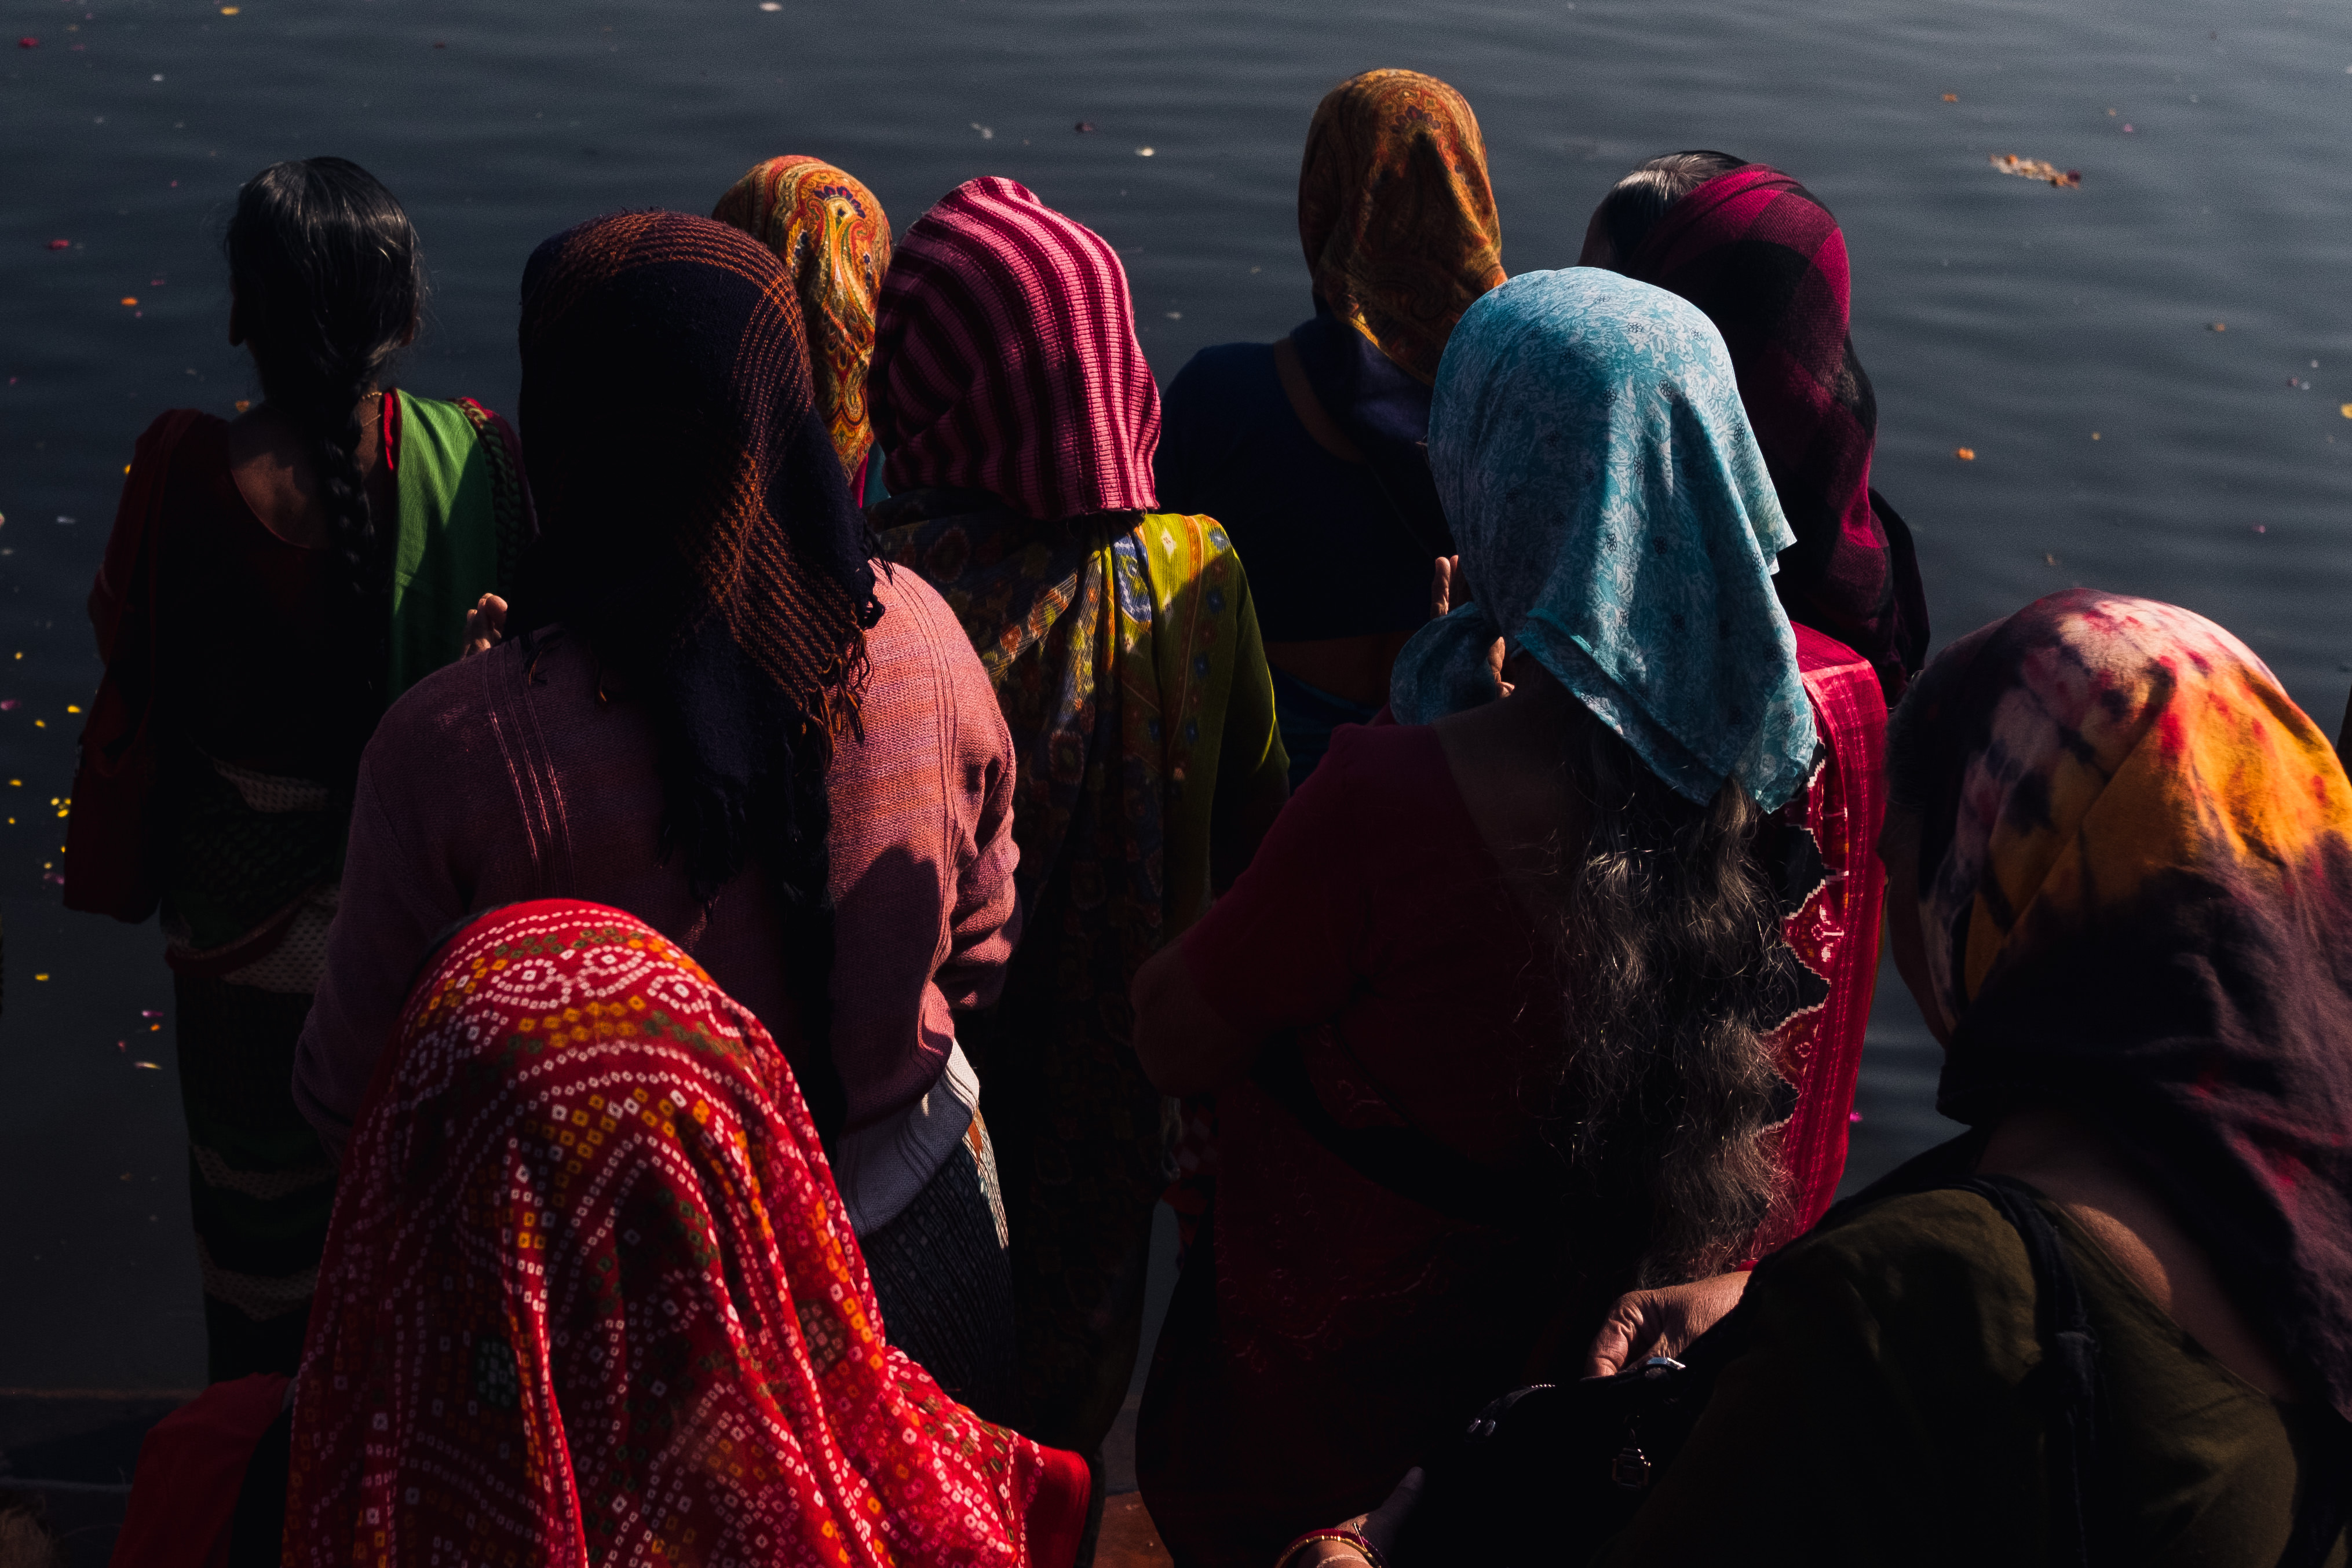 India Street Photography During Holi Festival. ladies stand in front of water praying. Images by Jason Vinson